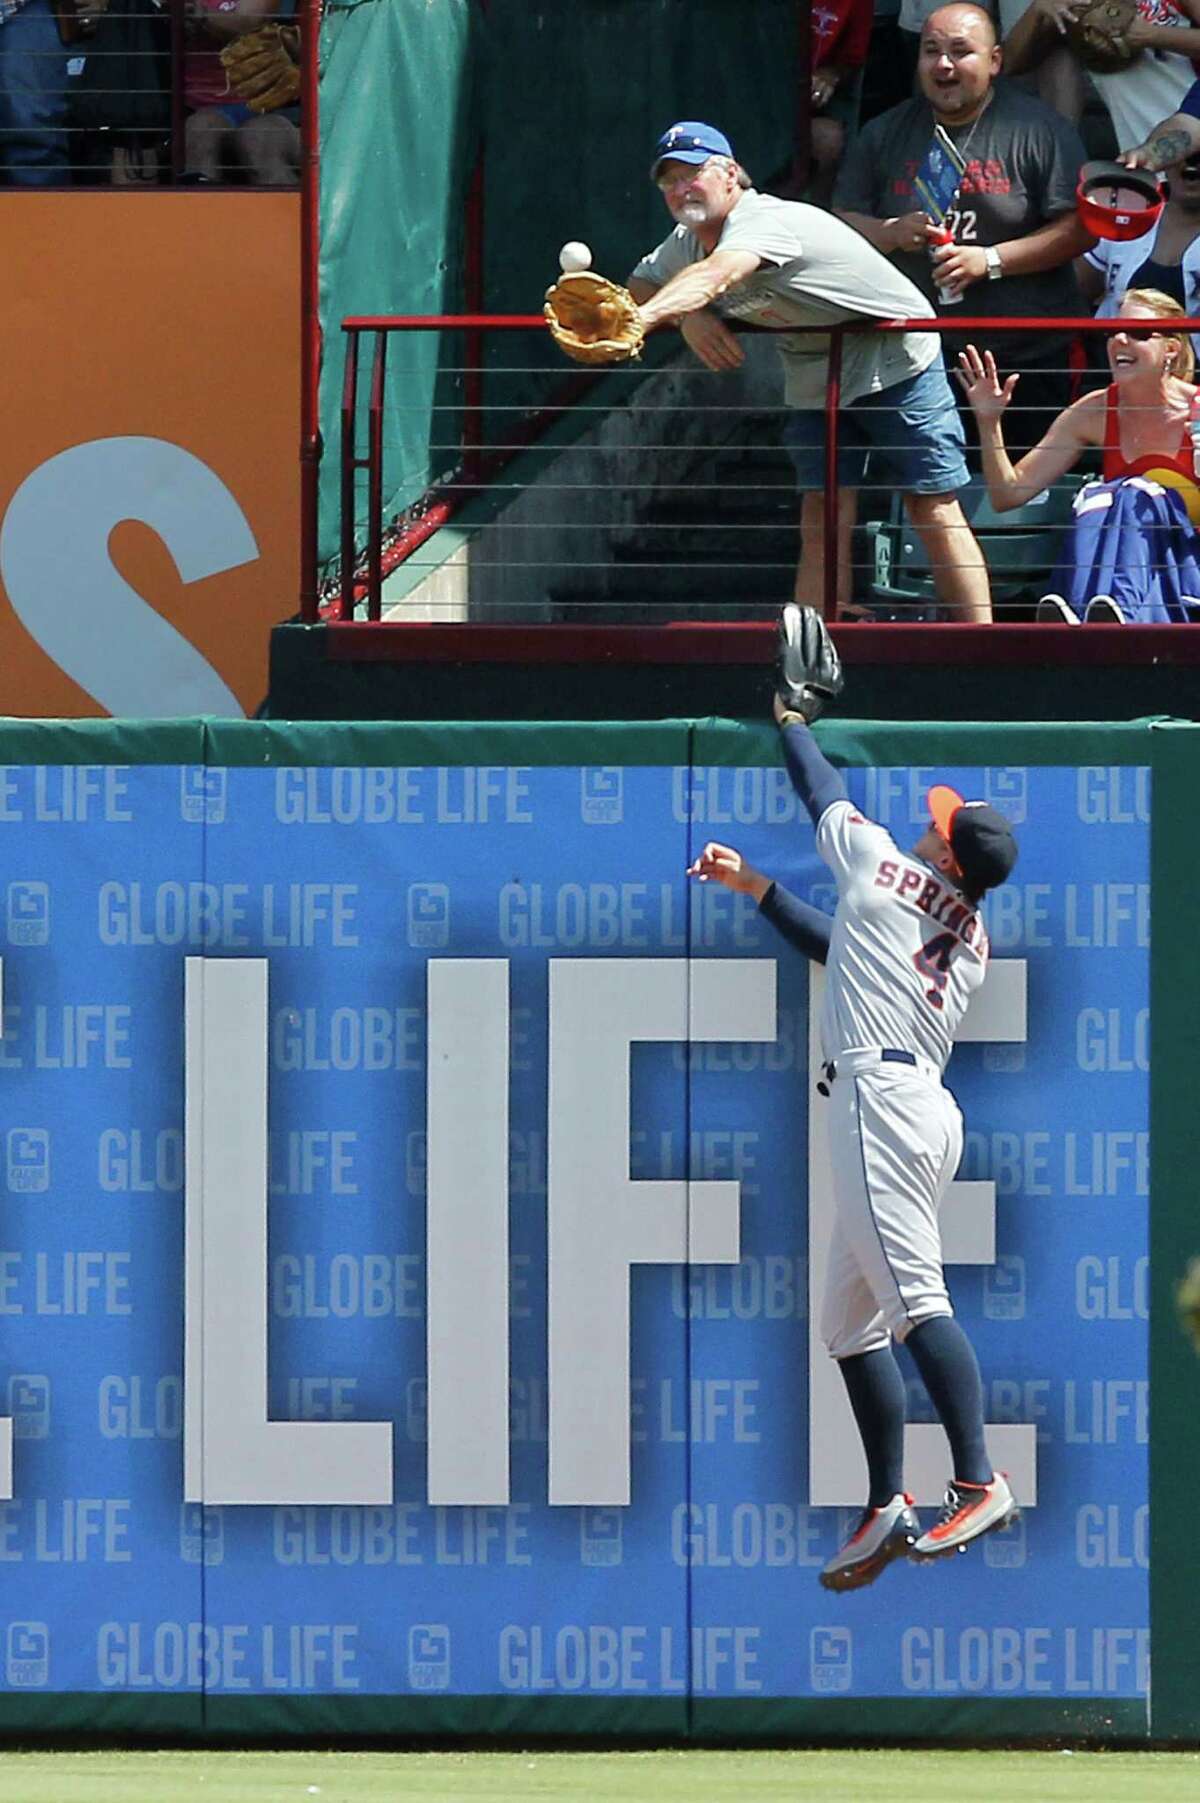 If you read the signs, the Astros' hopes of a Thursday win were on life support even before the Rangers' Rougned Odor homers in the eighth inning just beyond the reach of Astros right fielder George Springer.